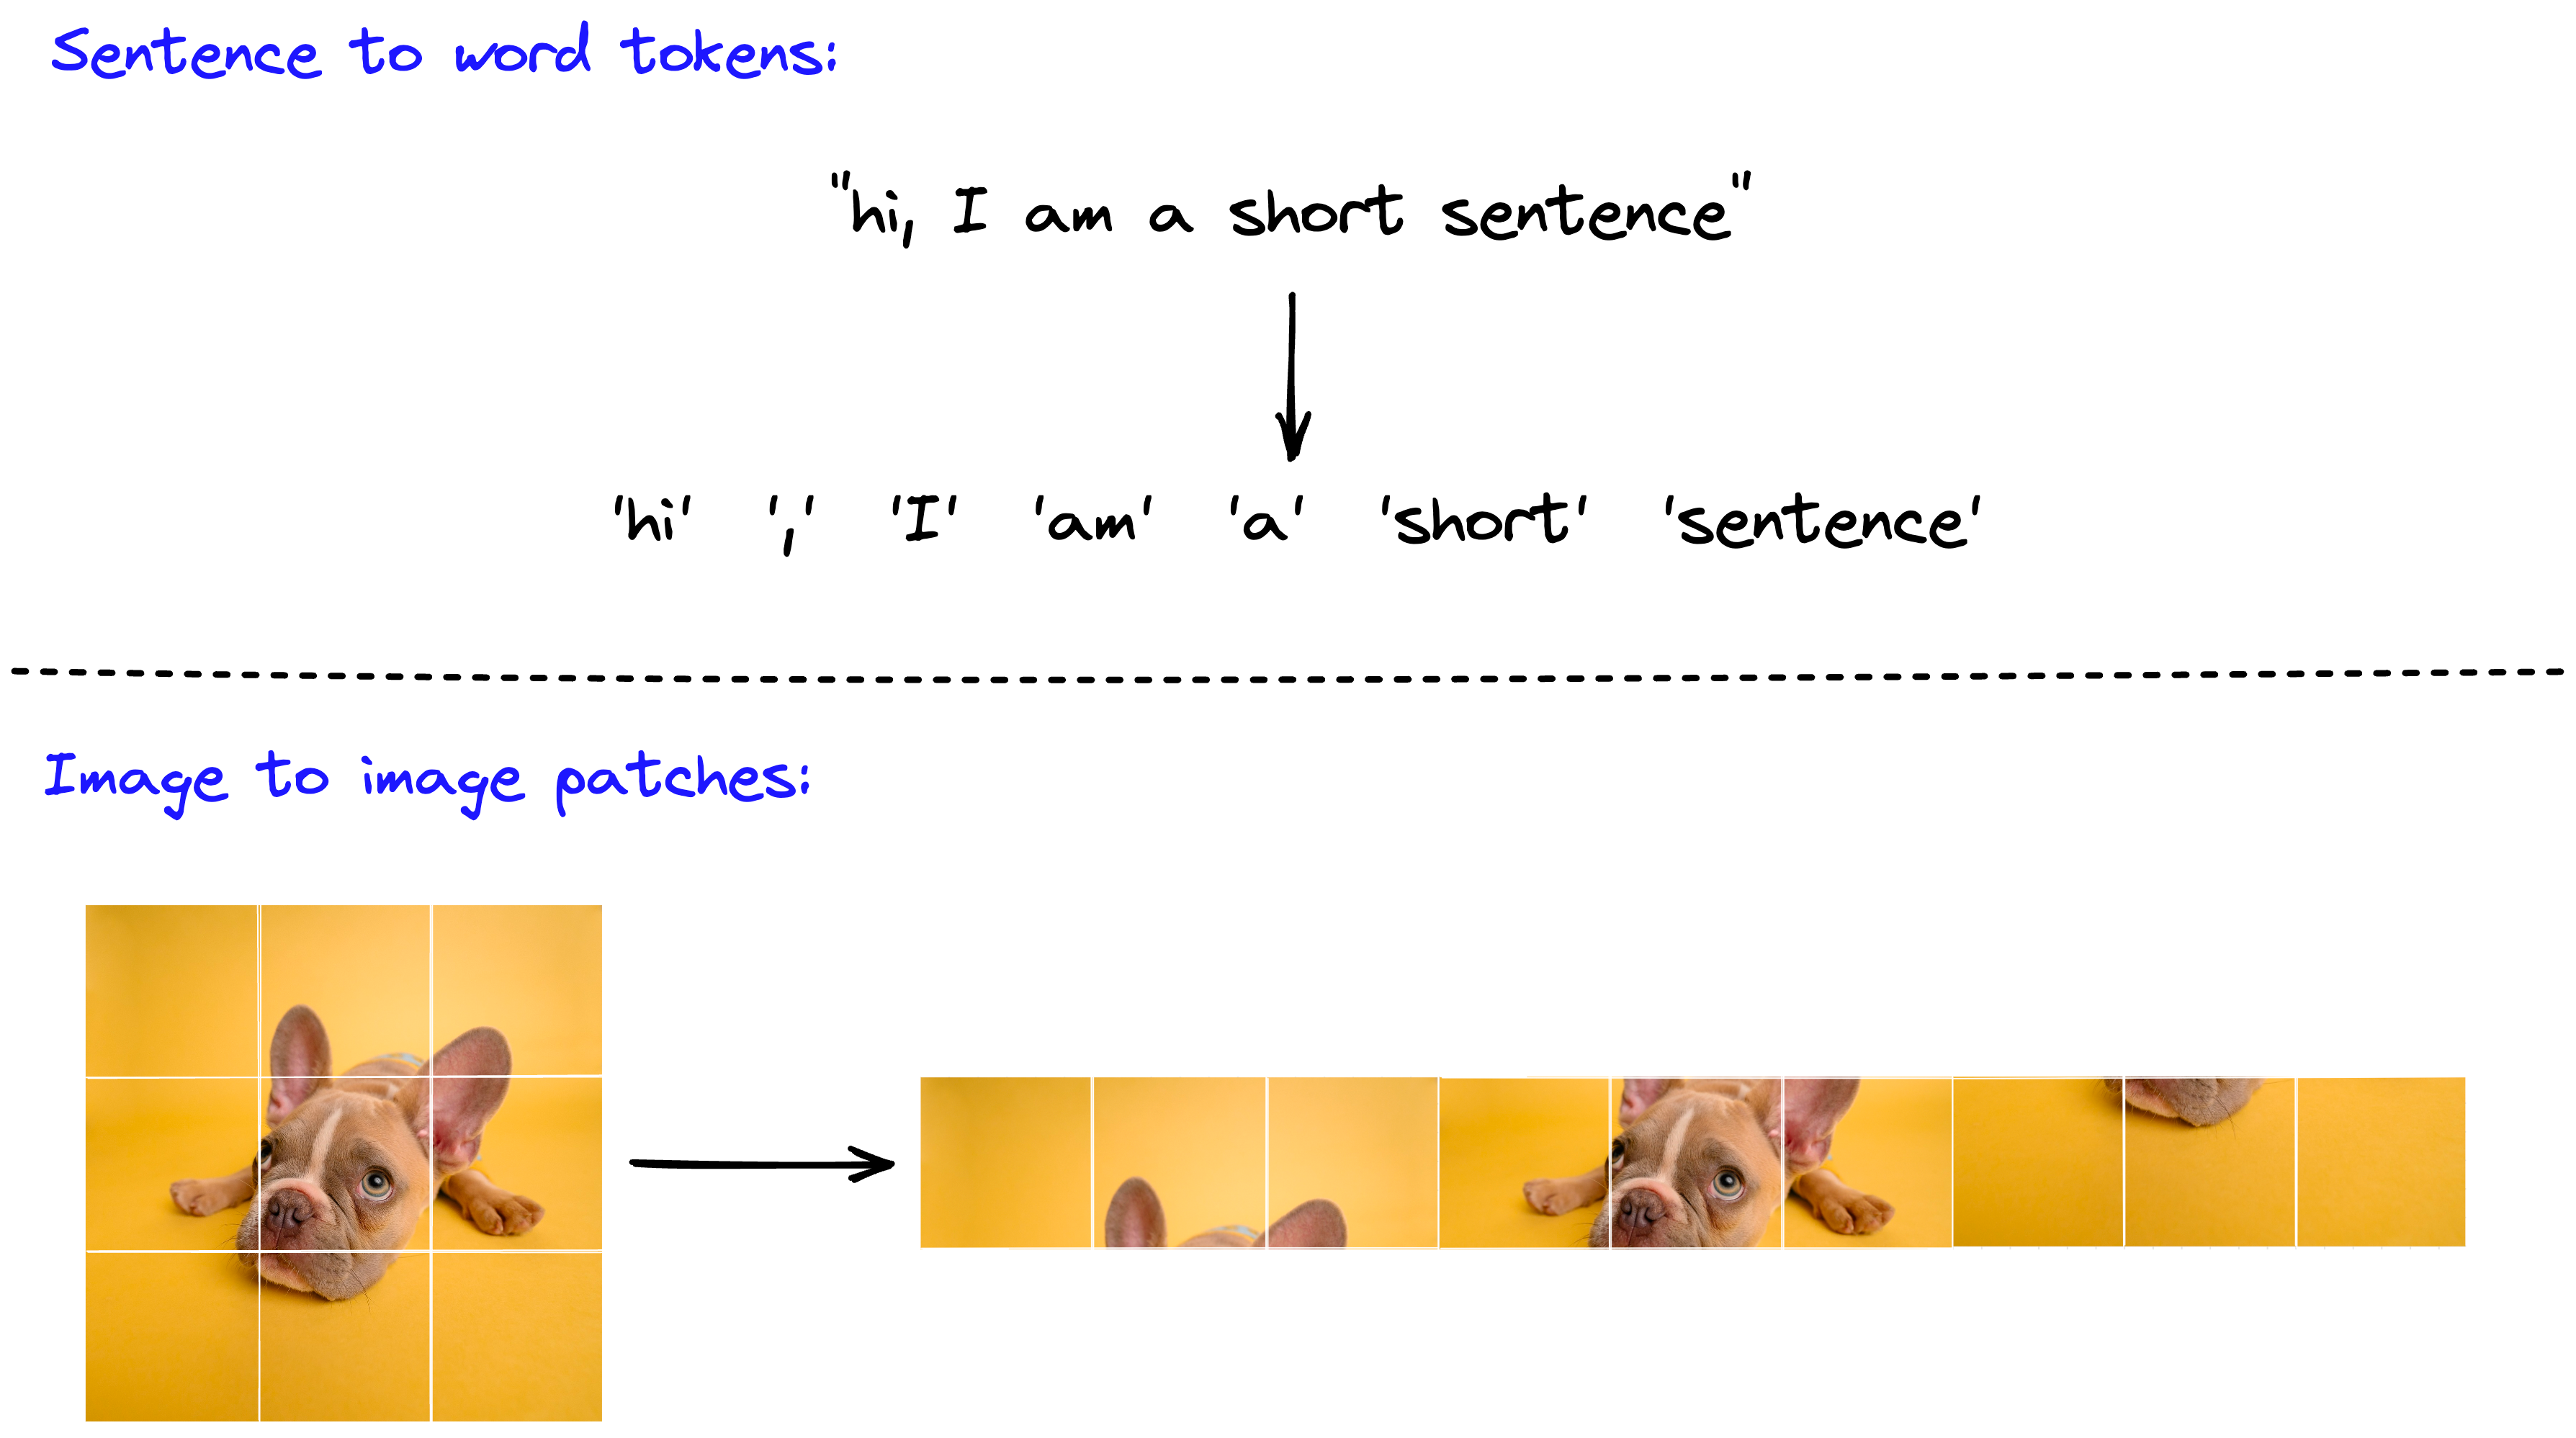 NLP transformers and ViT both split larger sequences (sentences or images) into tokens or patches.